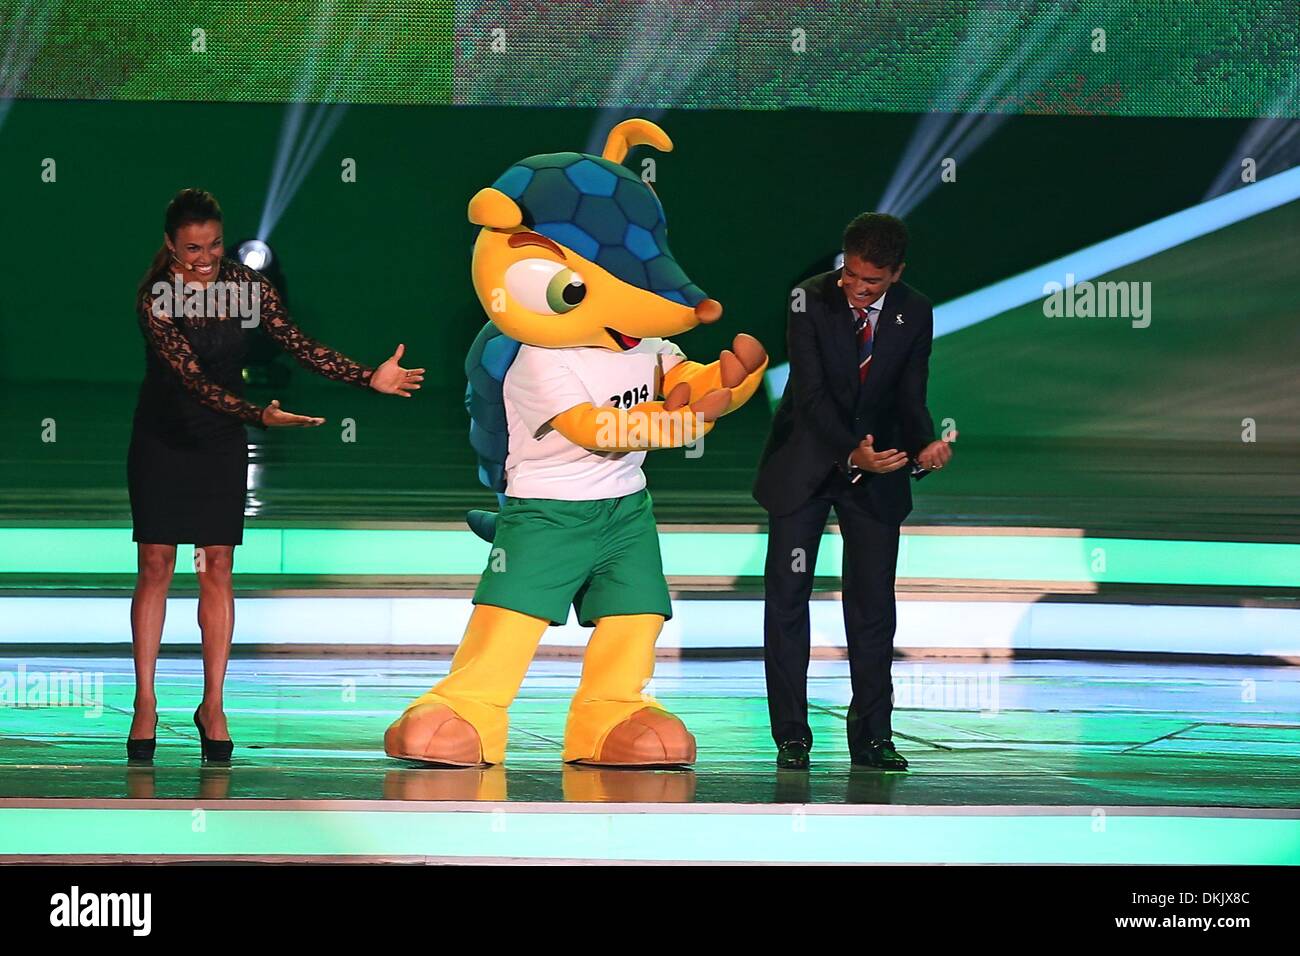 Costa Do Sauipe, Brazil. 6th Dec, 2013. Former Brazilian soccer player Jose Roberto Gama de Oliveira, also known as Bebeto (R), Brazilian soccer player Marta Vieira (L) and the mascot Fuleco (C) perform during the ceremony of the final draw for the groups and matchups of the 2014 FIFA World Cup Brazil in Costa do Sauipe, Brazil, on Dec. 6, 2013. (Xinhua/Xu Zijian) Credit:  Xinhua/Alamy Live News Stock Photo